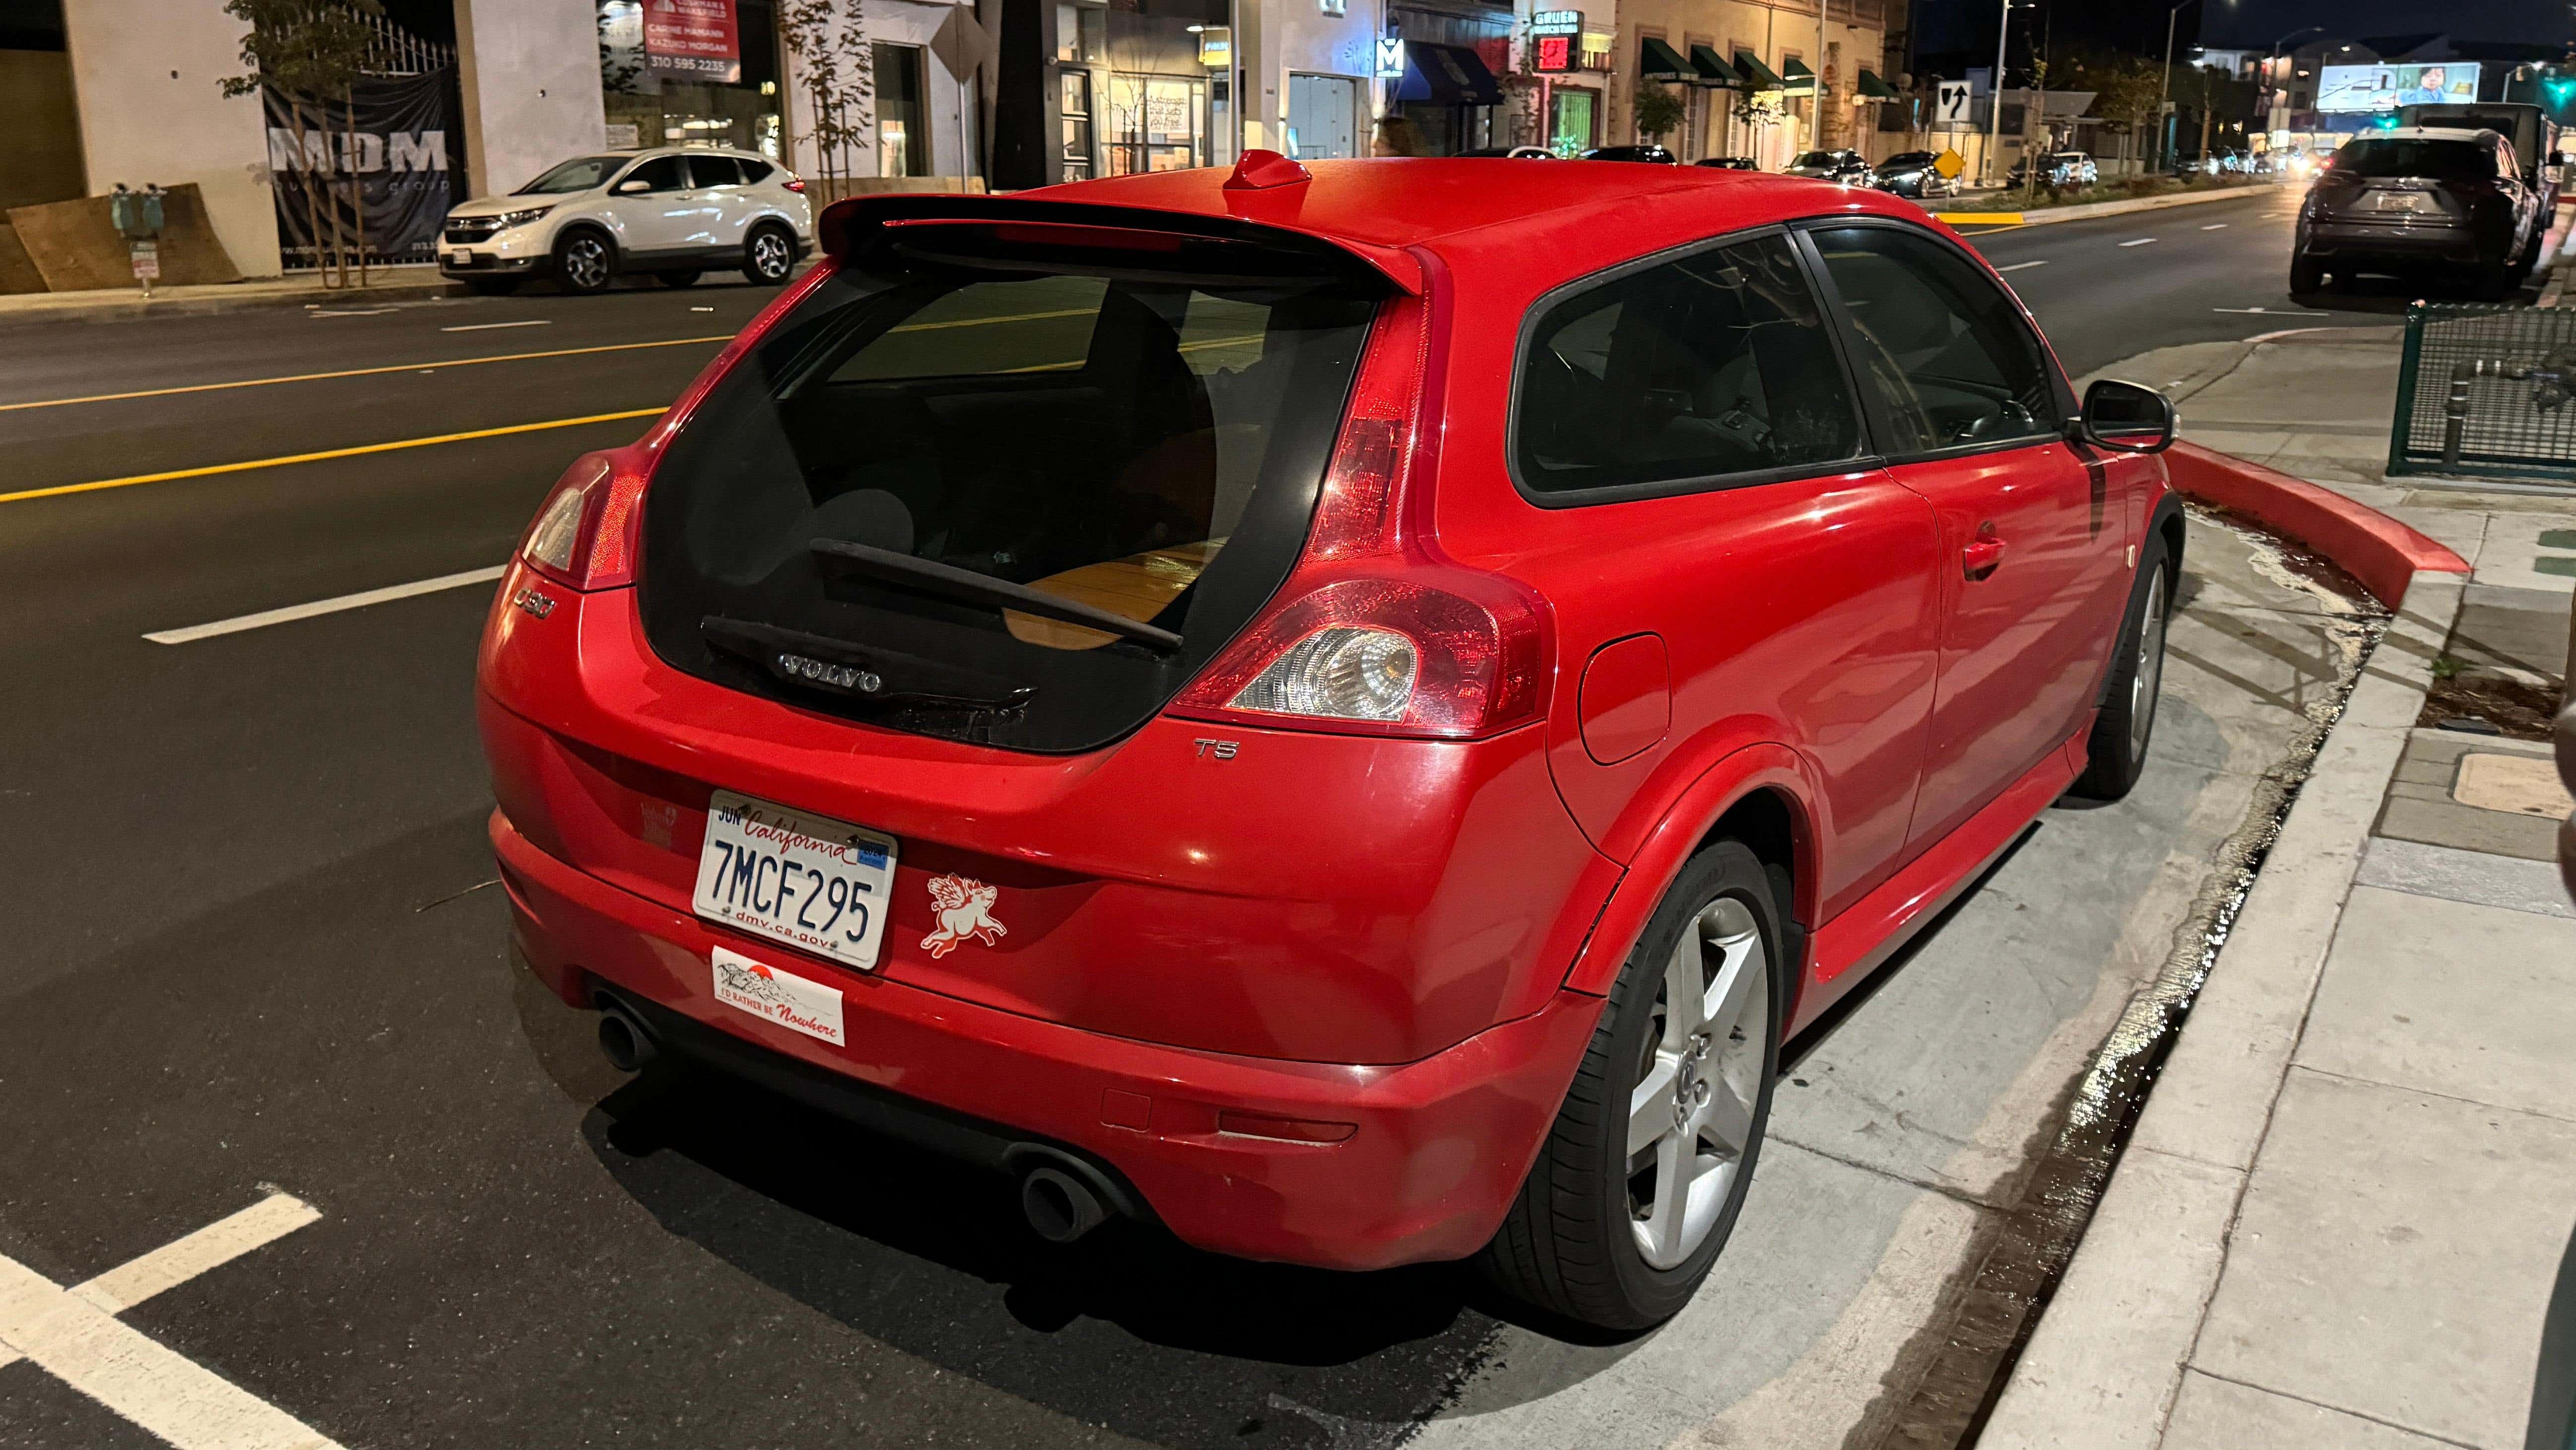 Rear 3/4 view of a red Boston Red Sox Special Edition Volvo C30